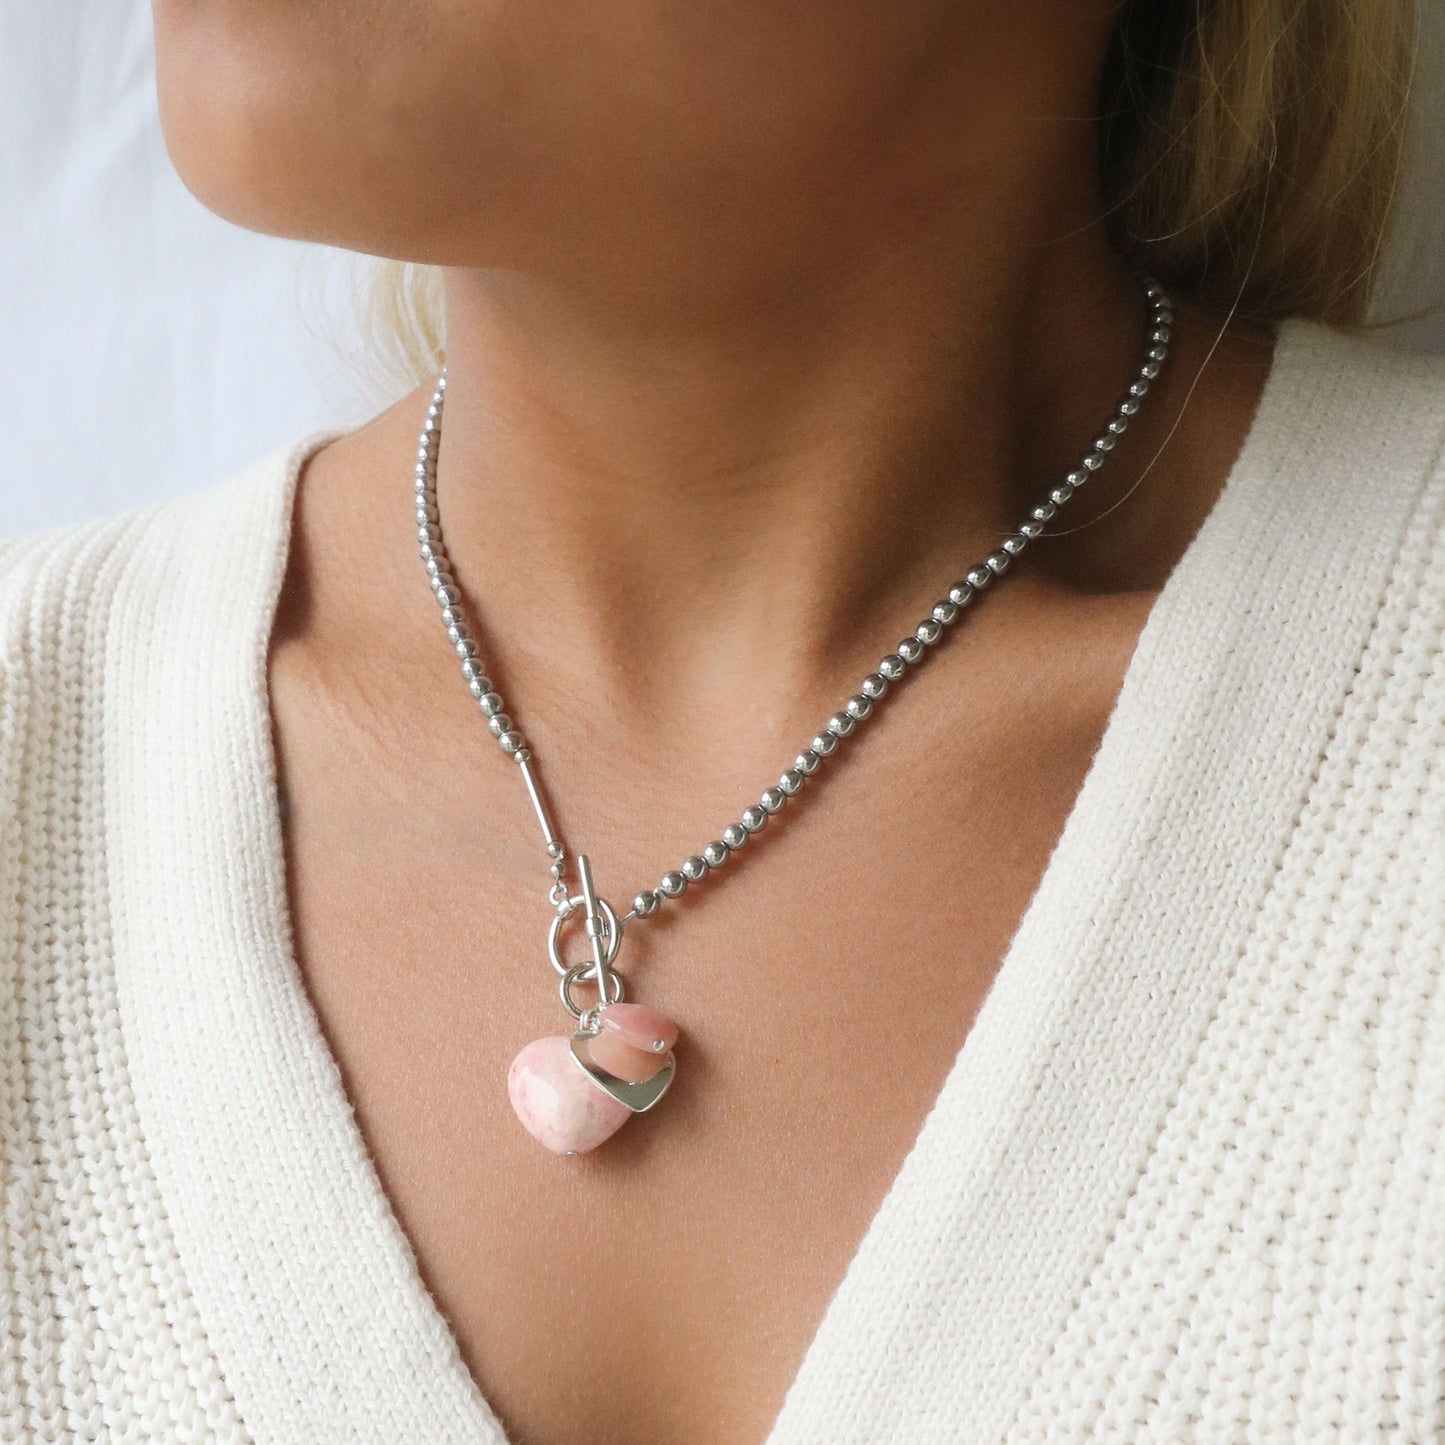 Pale pink fossil stone charms necklace